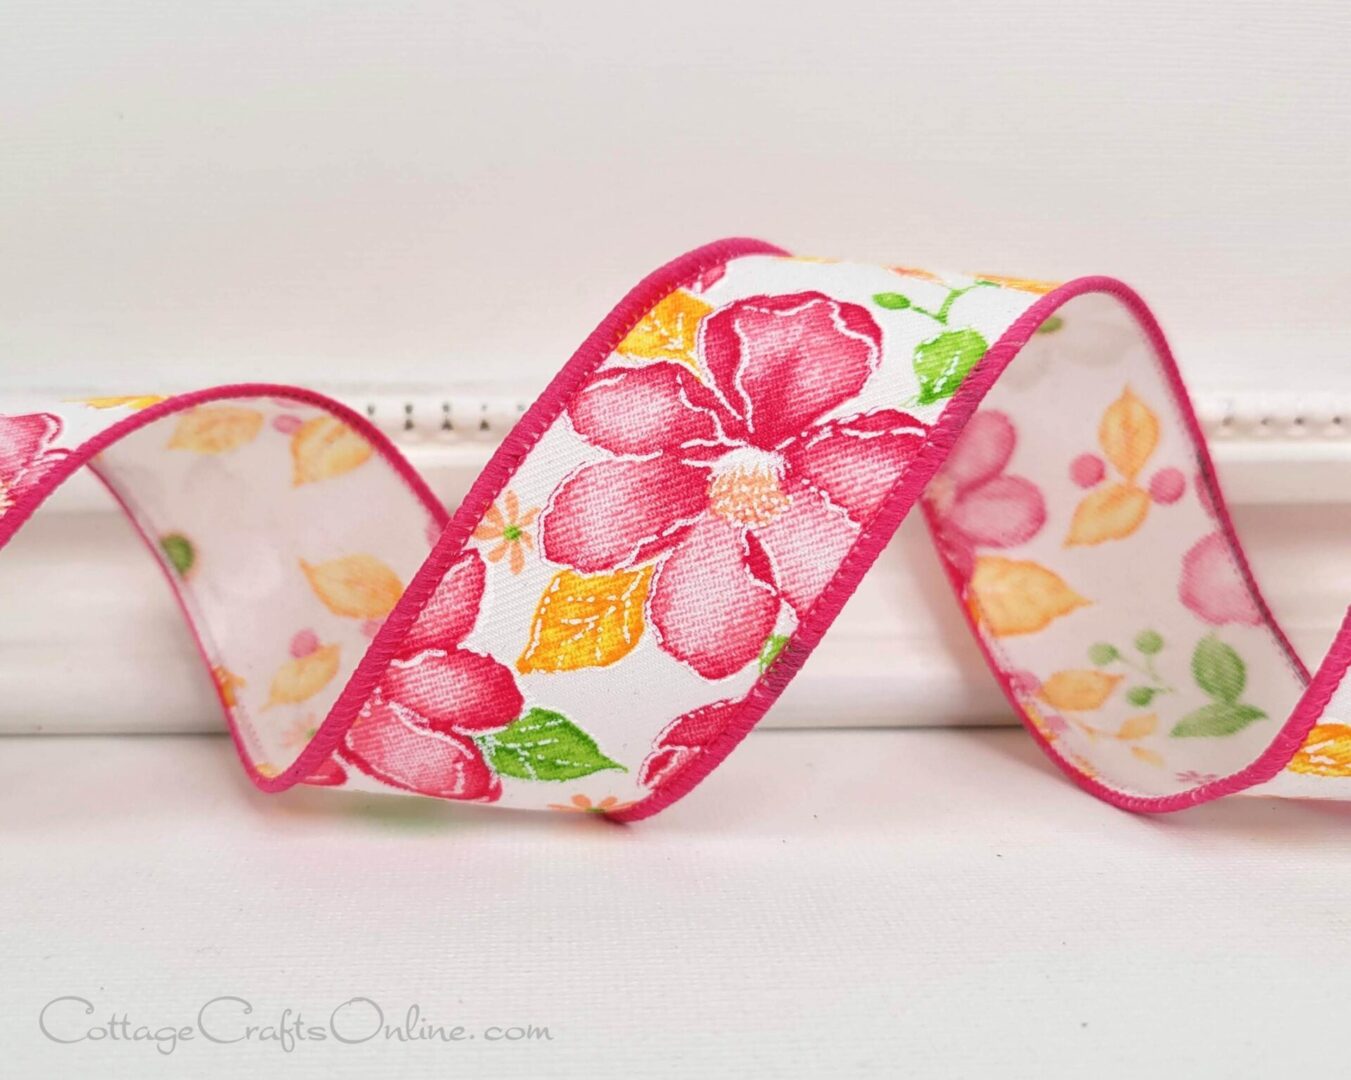 A pink and white floral ribbon sitting on top of a table.